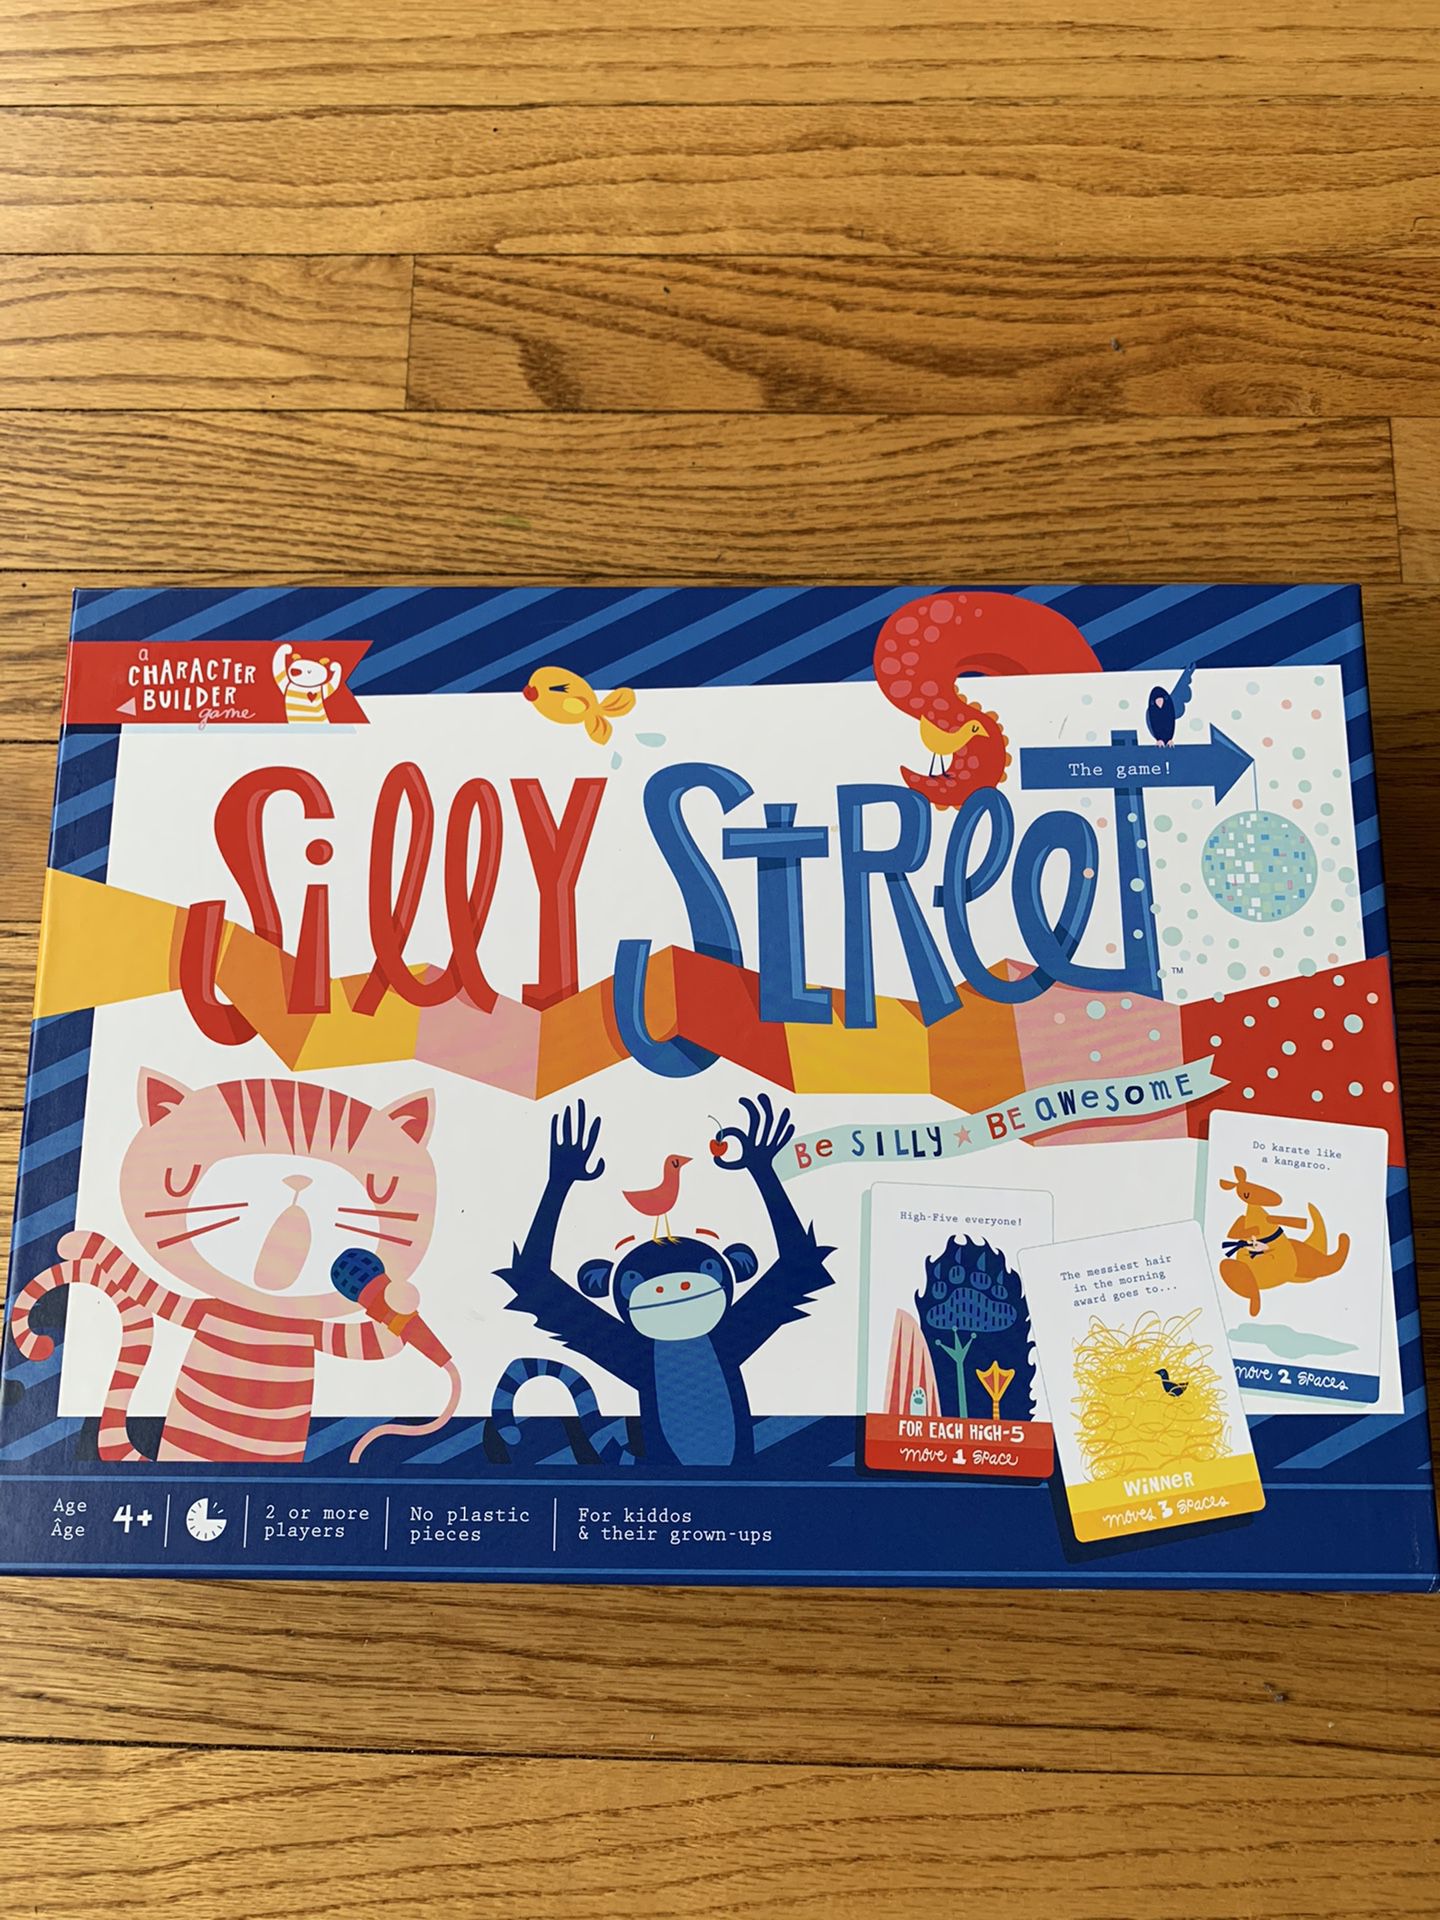 Award Winning Game for 4-8 year olds- Silly Street Game